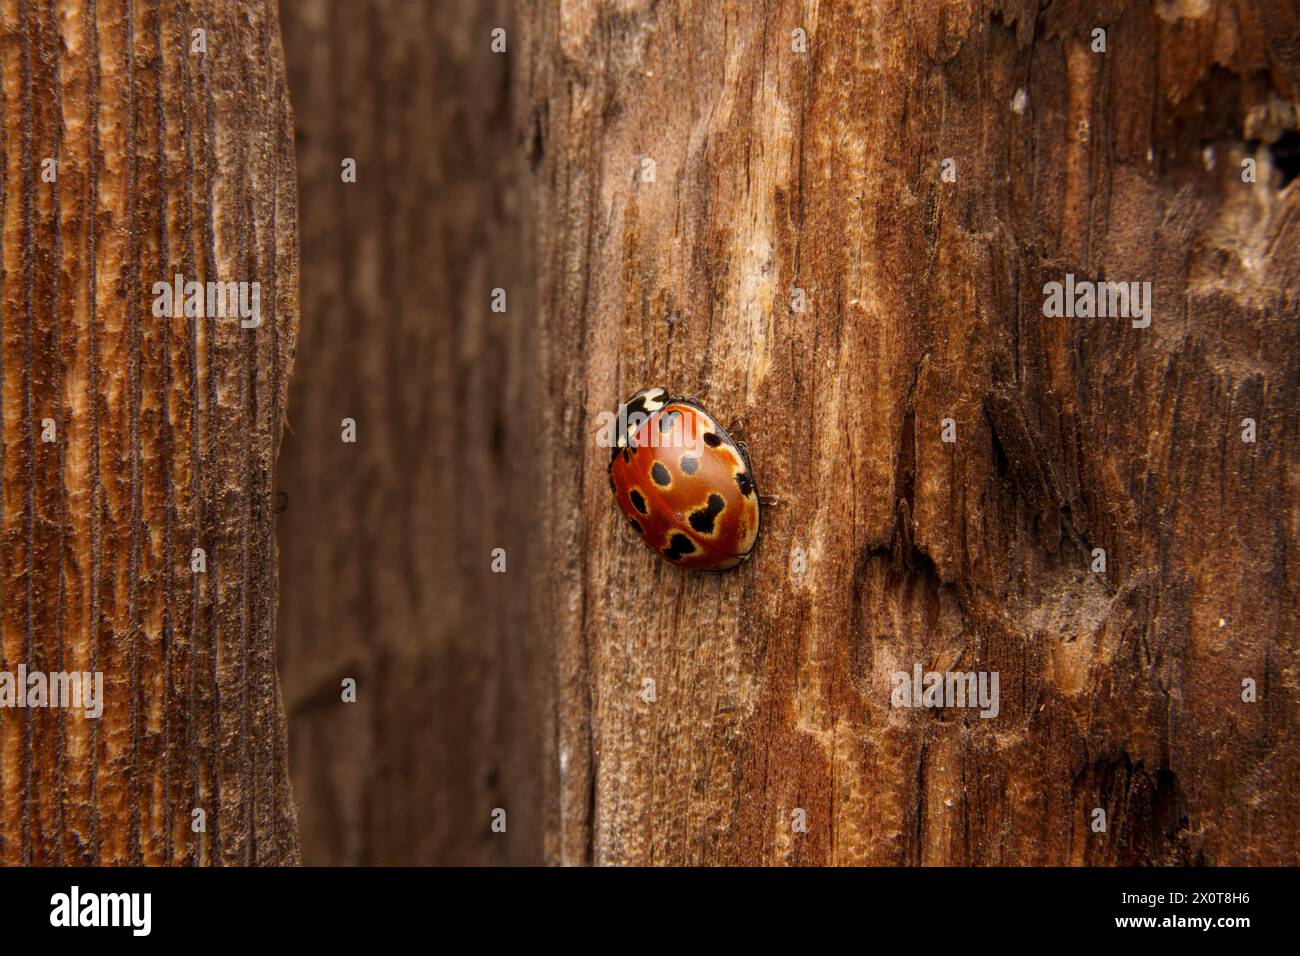 Anatis ocellata Family Coccinellidae Genus Anatis Eyed ladybug ladybird bug wild nature insect wallpaper, picture, photography Stock Photo